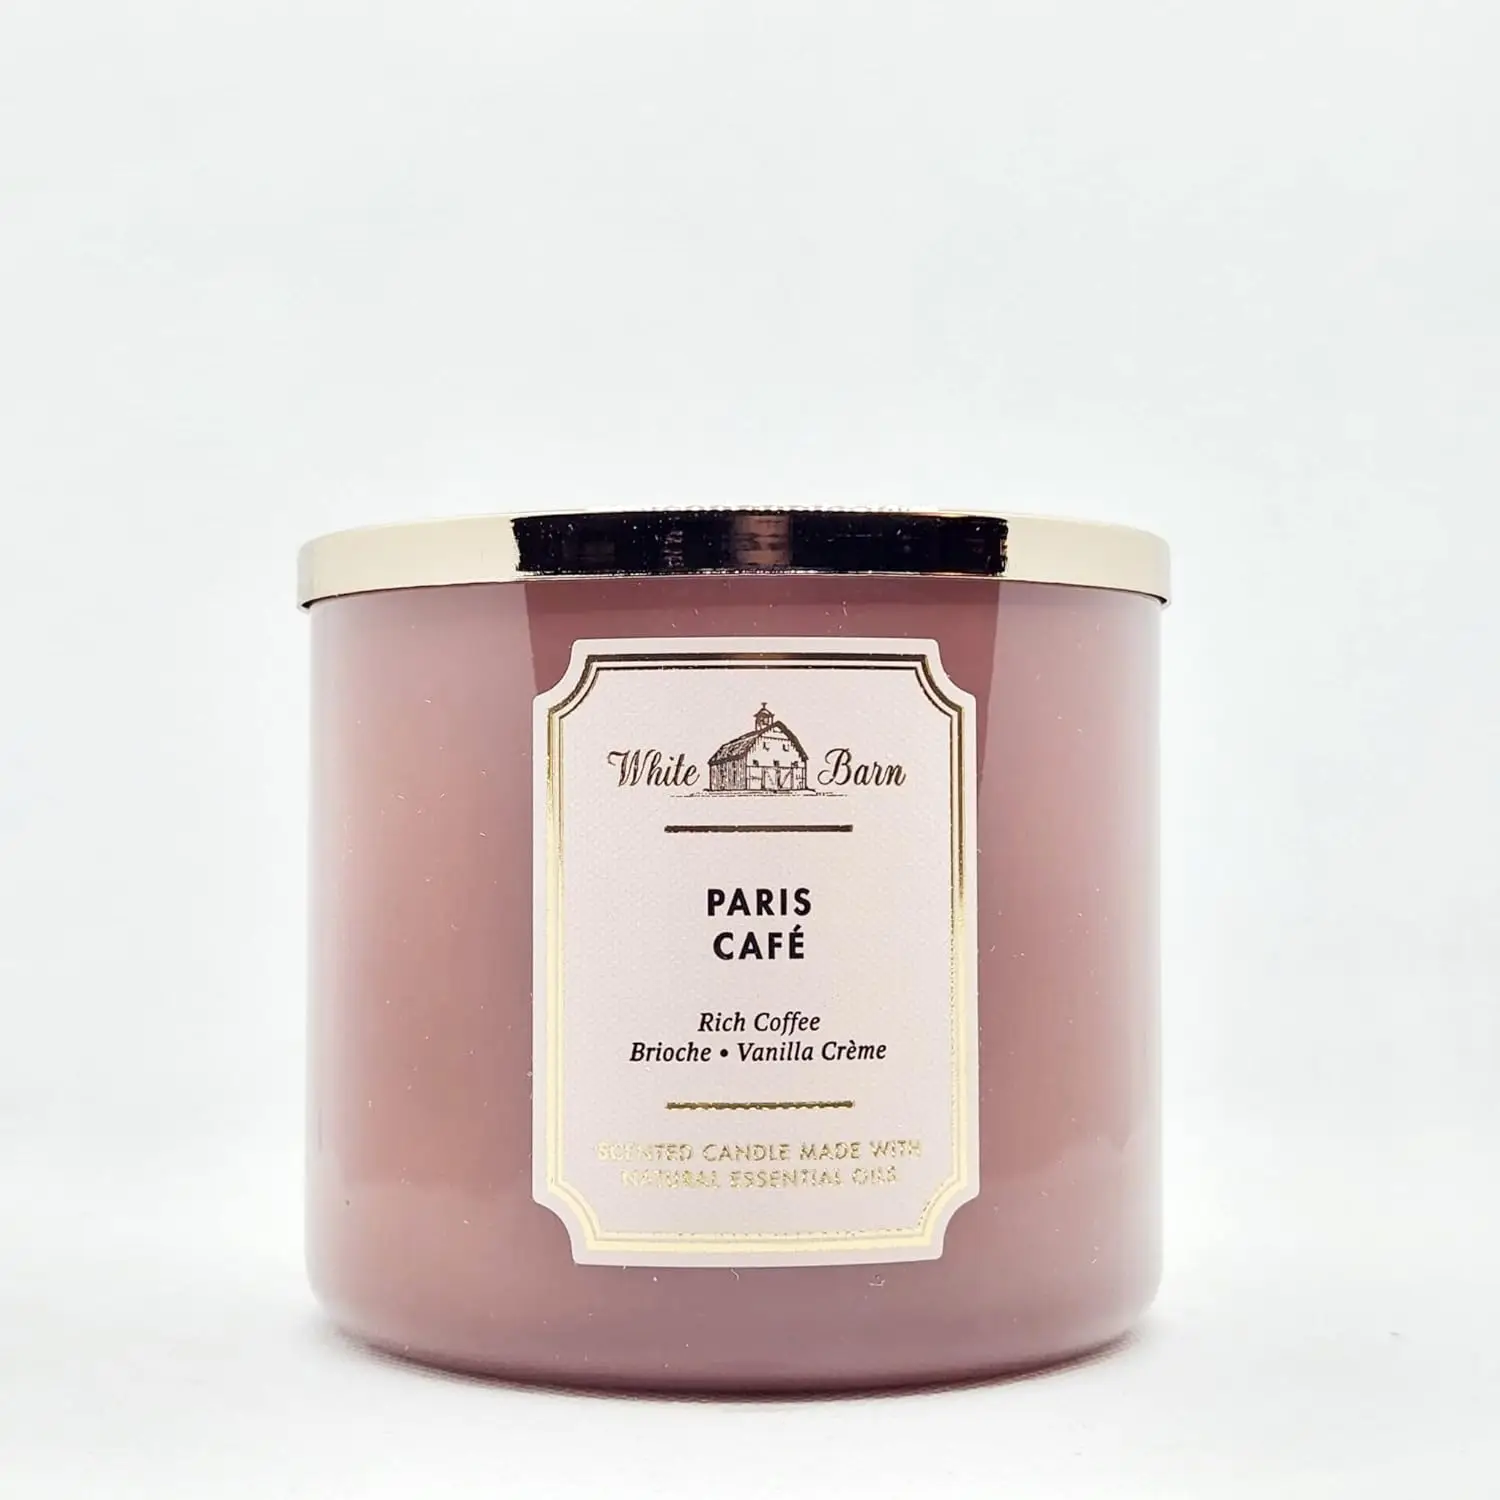 

and Body Works, White Barn 3-Wick Candle w/Essential Oils - 14.5 oz - 2021 Scents! (ParisCafe) Incense holder Colognes for men